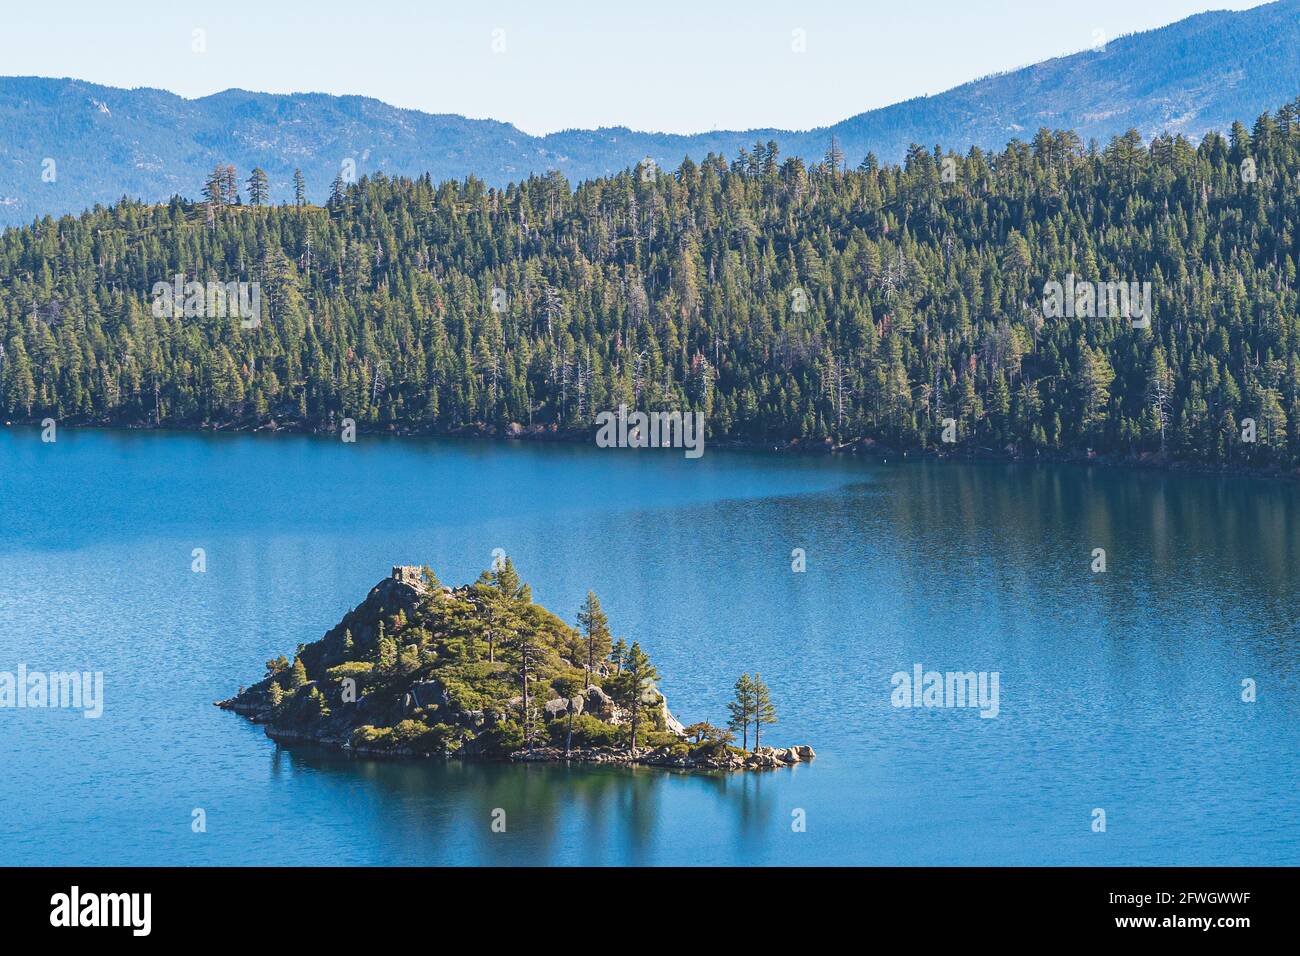 Fannette Island surrounded by blue water with reflections of trees in Emerald Bay, Lake Tahoe, California on clear sunny autumn day in close up Stock Photo